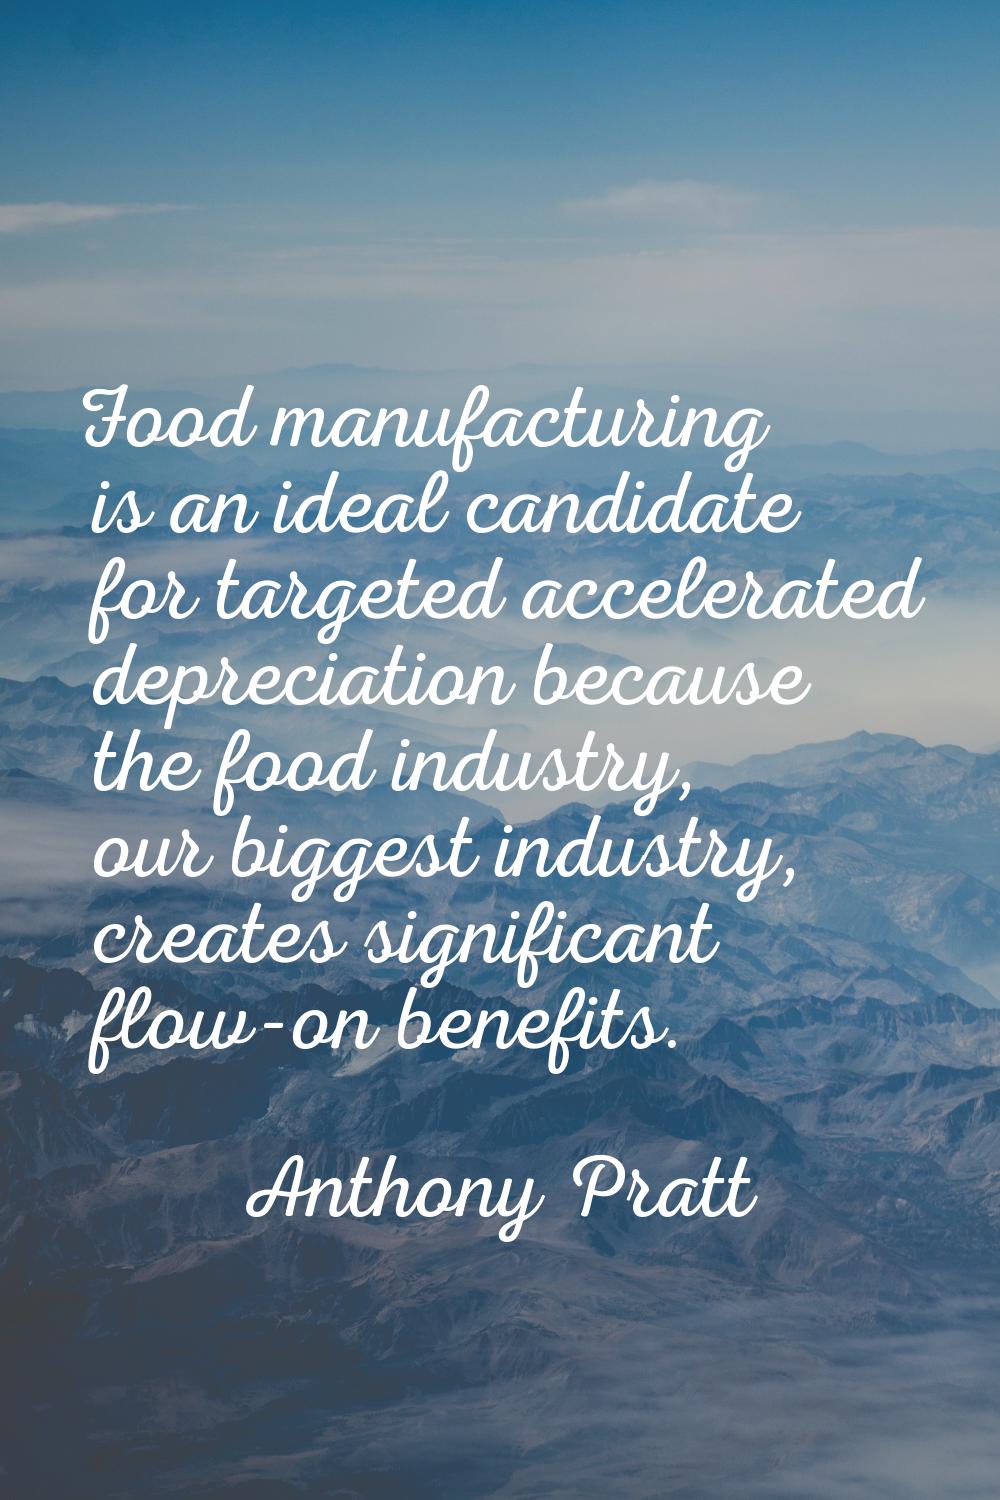 Food manufacturing is an ideal candidate for targeted accelerated depreciation because the food ind